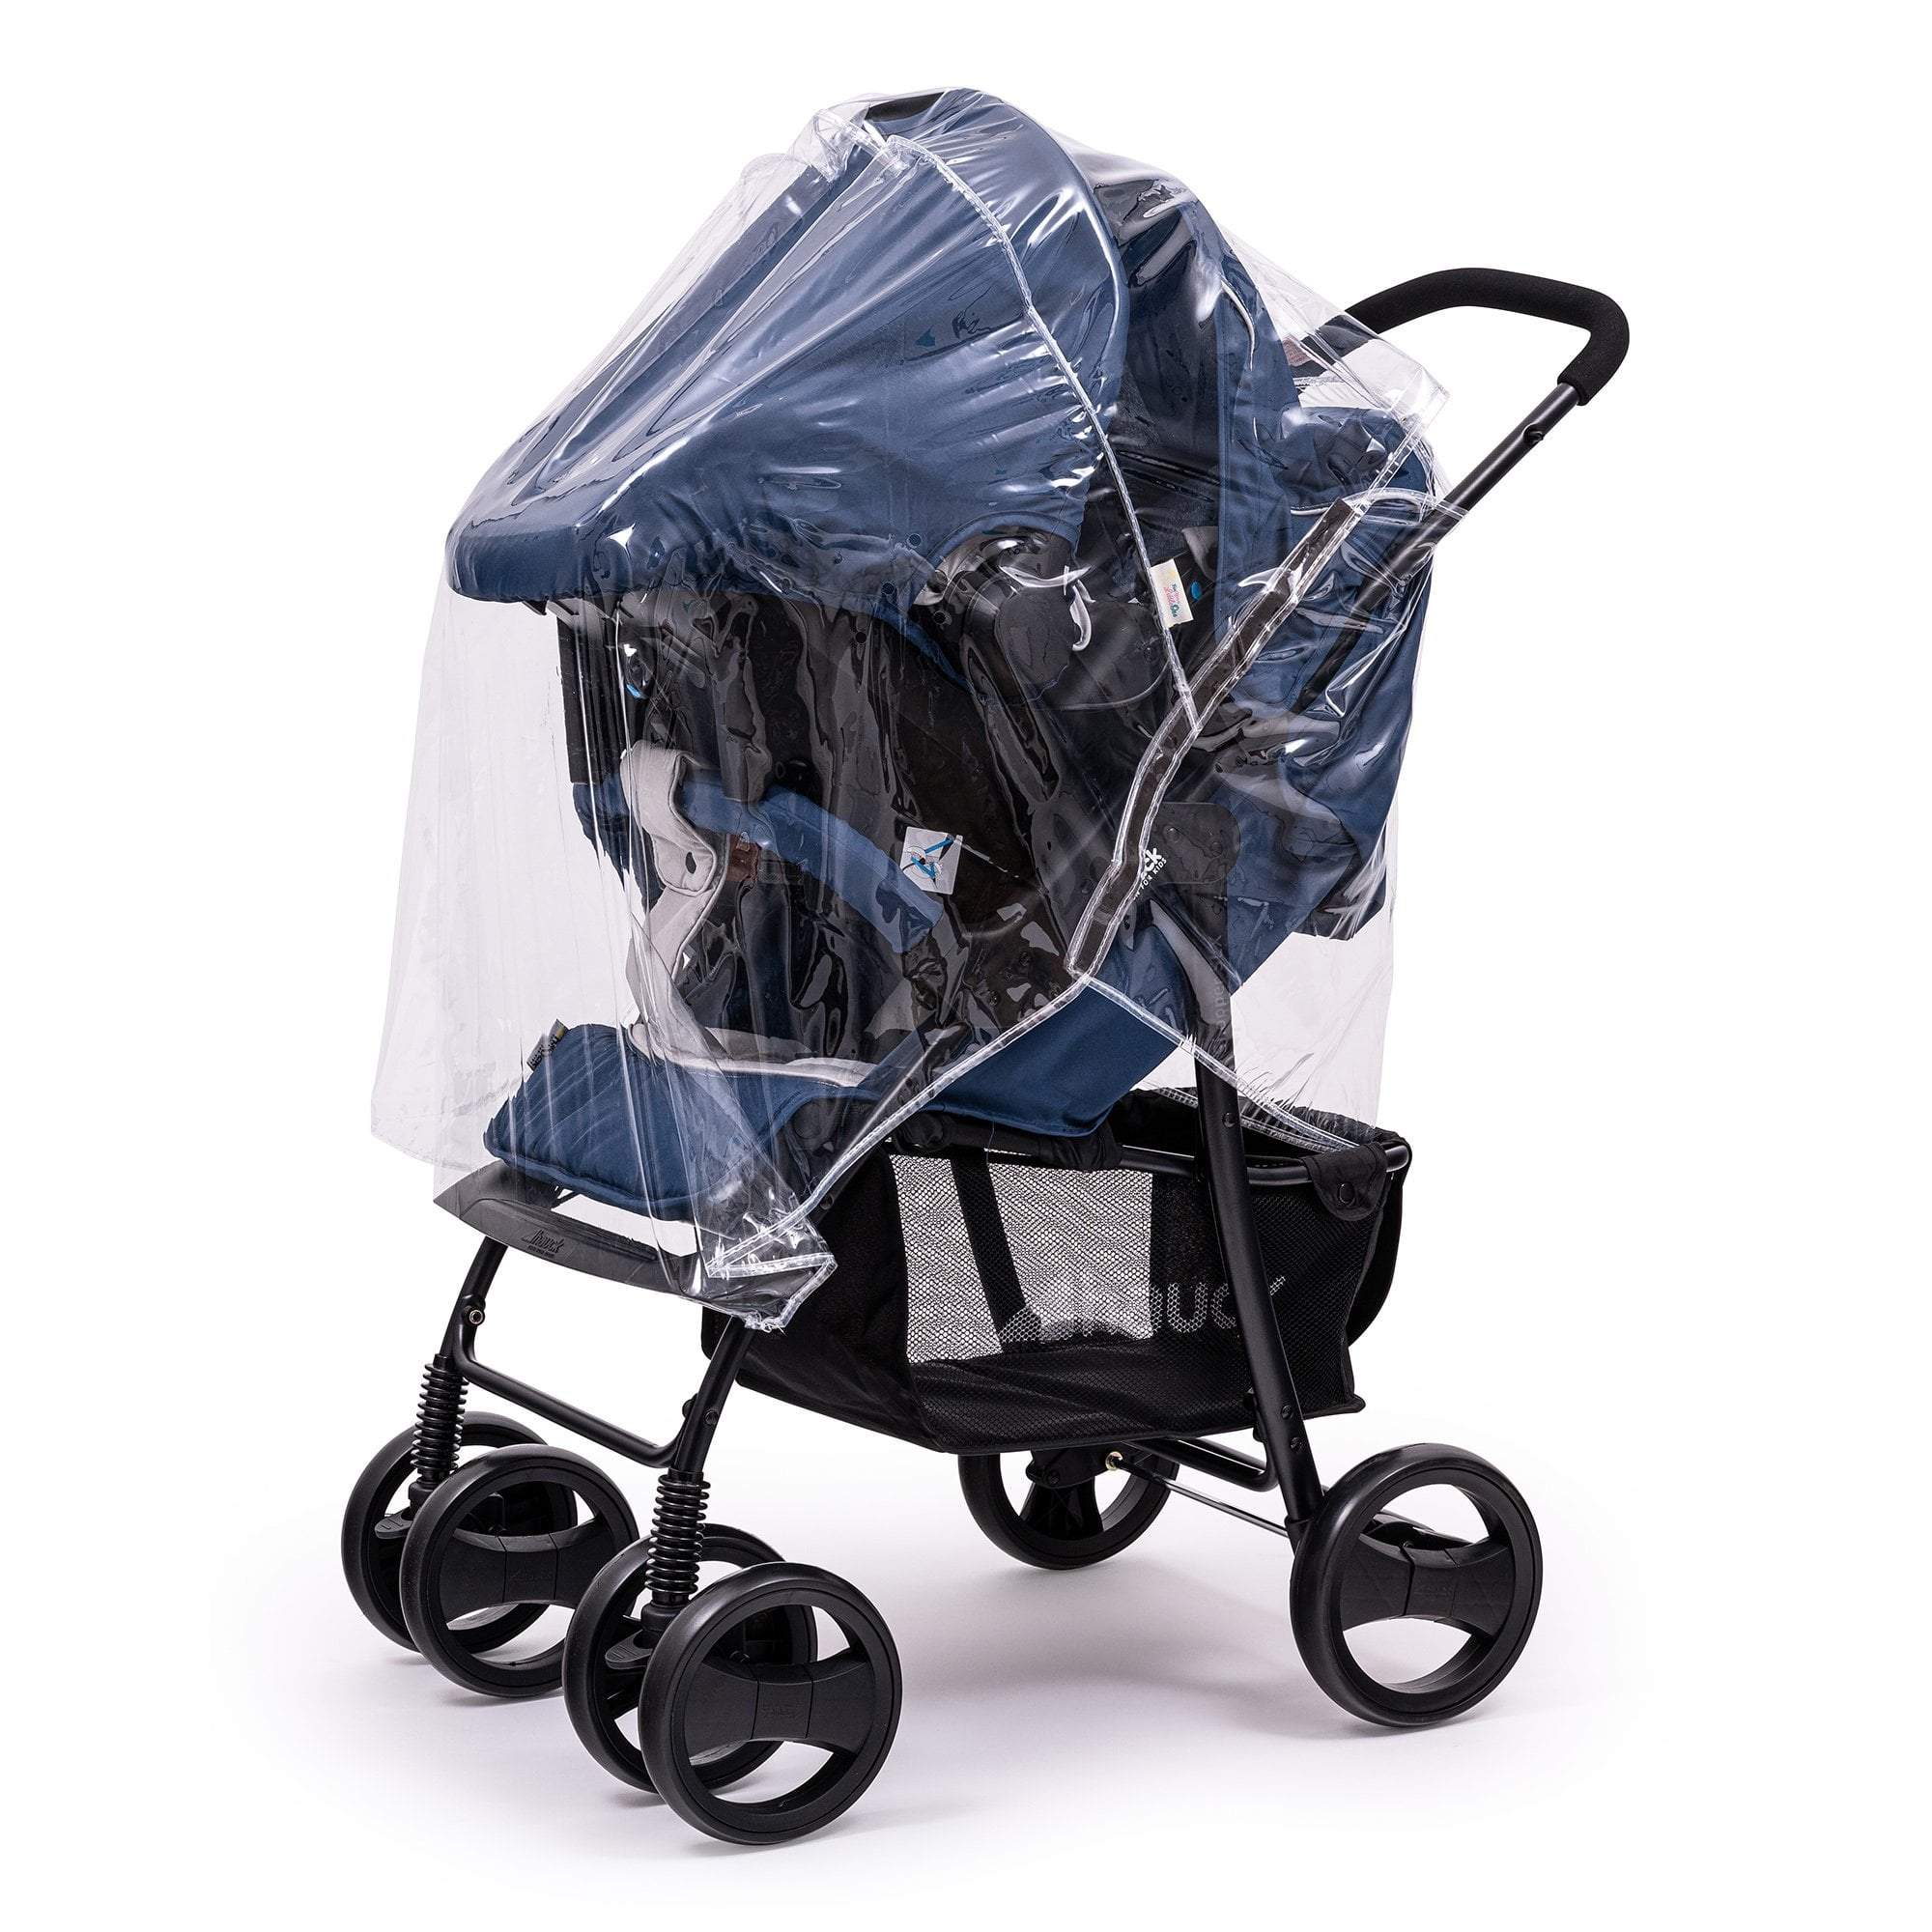 Travel System Raincover Compatible with Looping - Fits All Models - For Your Little One